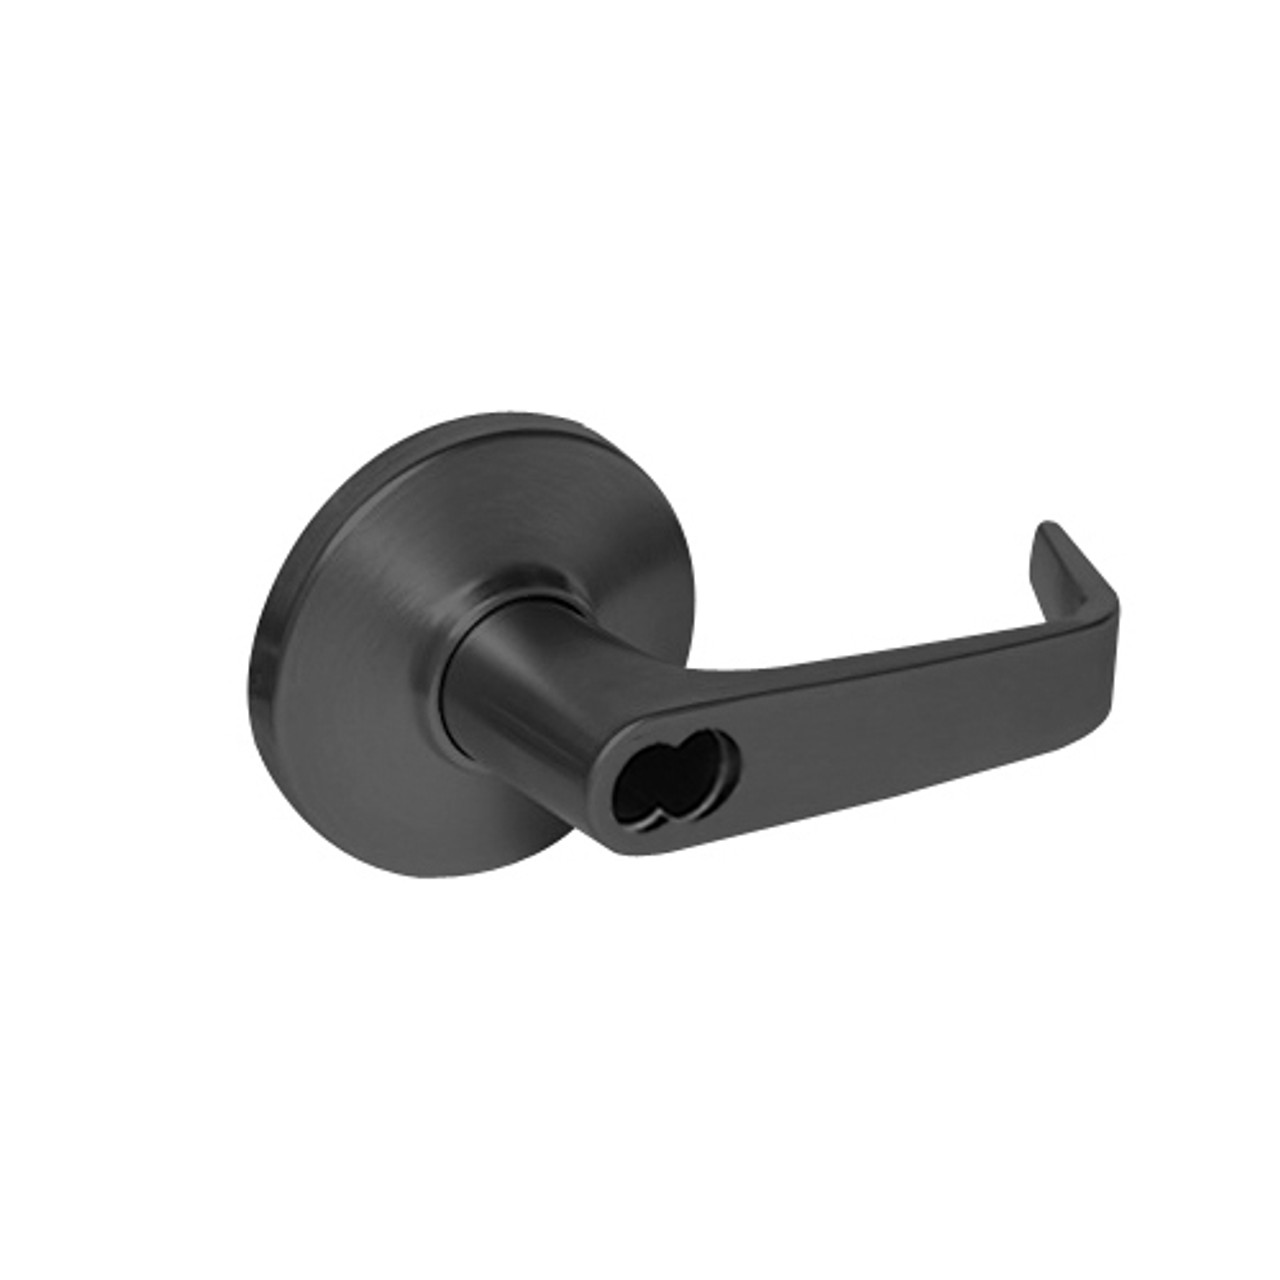 9K37DR15DS3622 Best 9K Series Special Function Cylindrical Lever Locks with Contour Angle with Return Lever Design Accept 7 Pin Best Core in Black